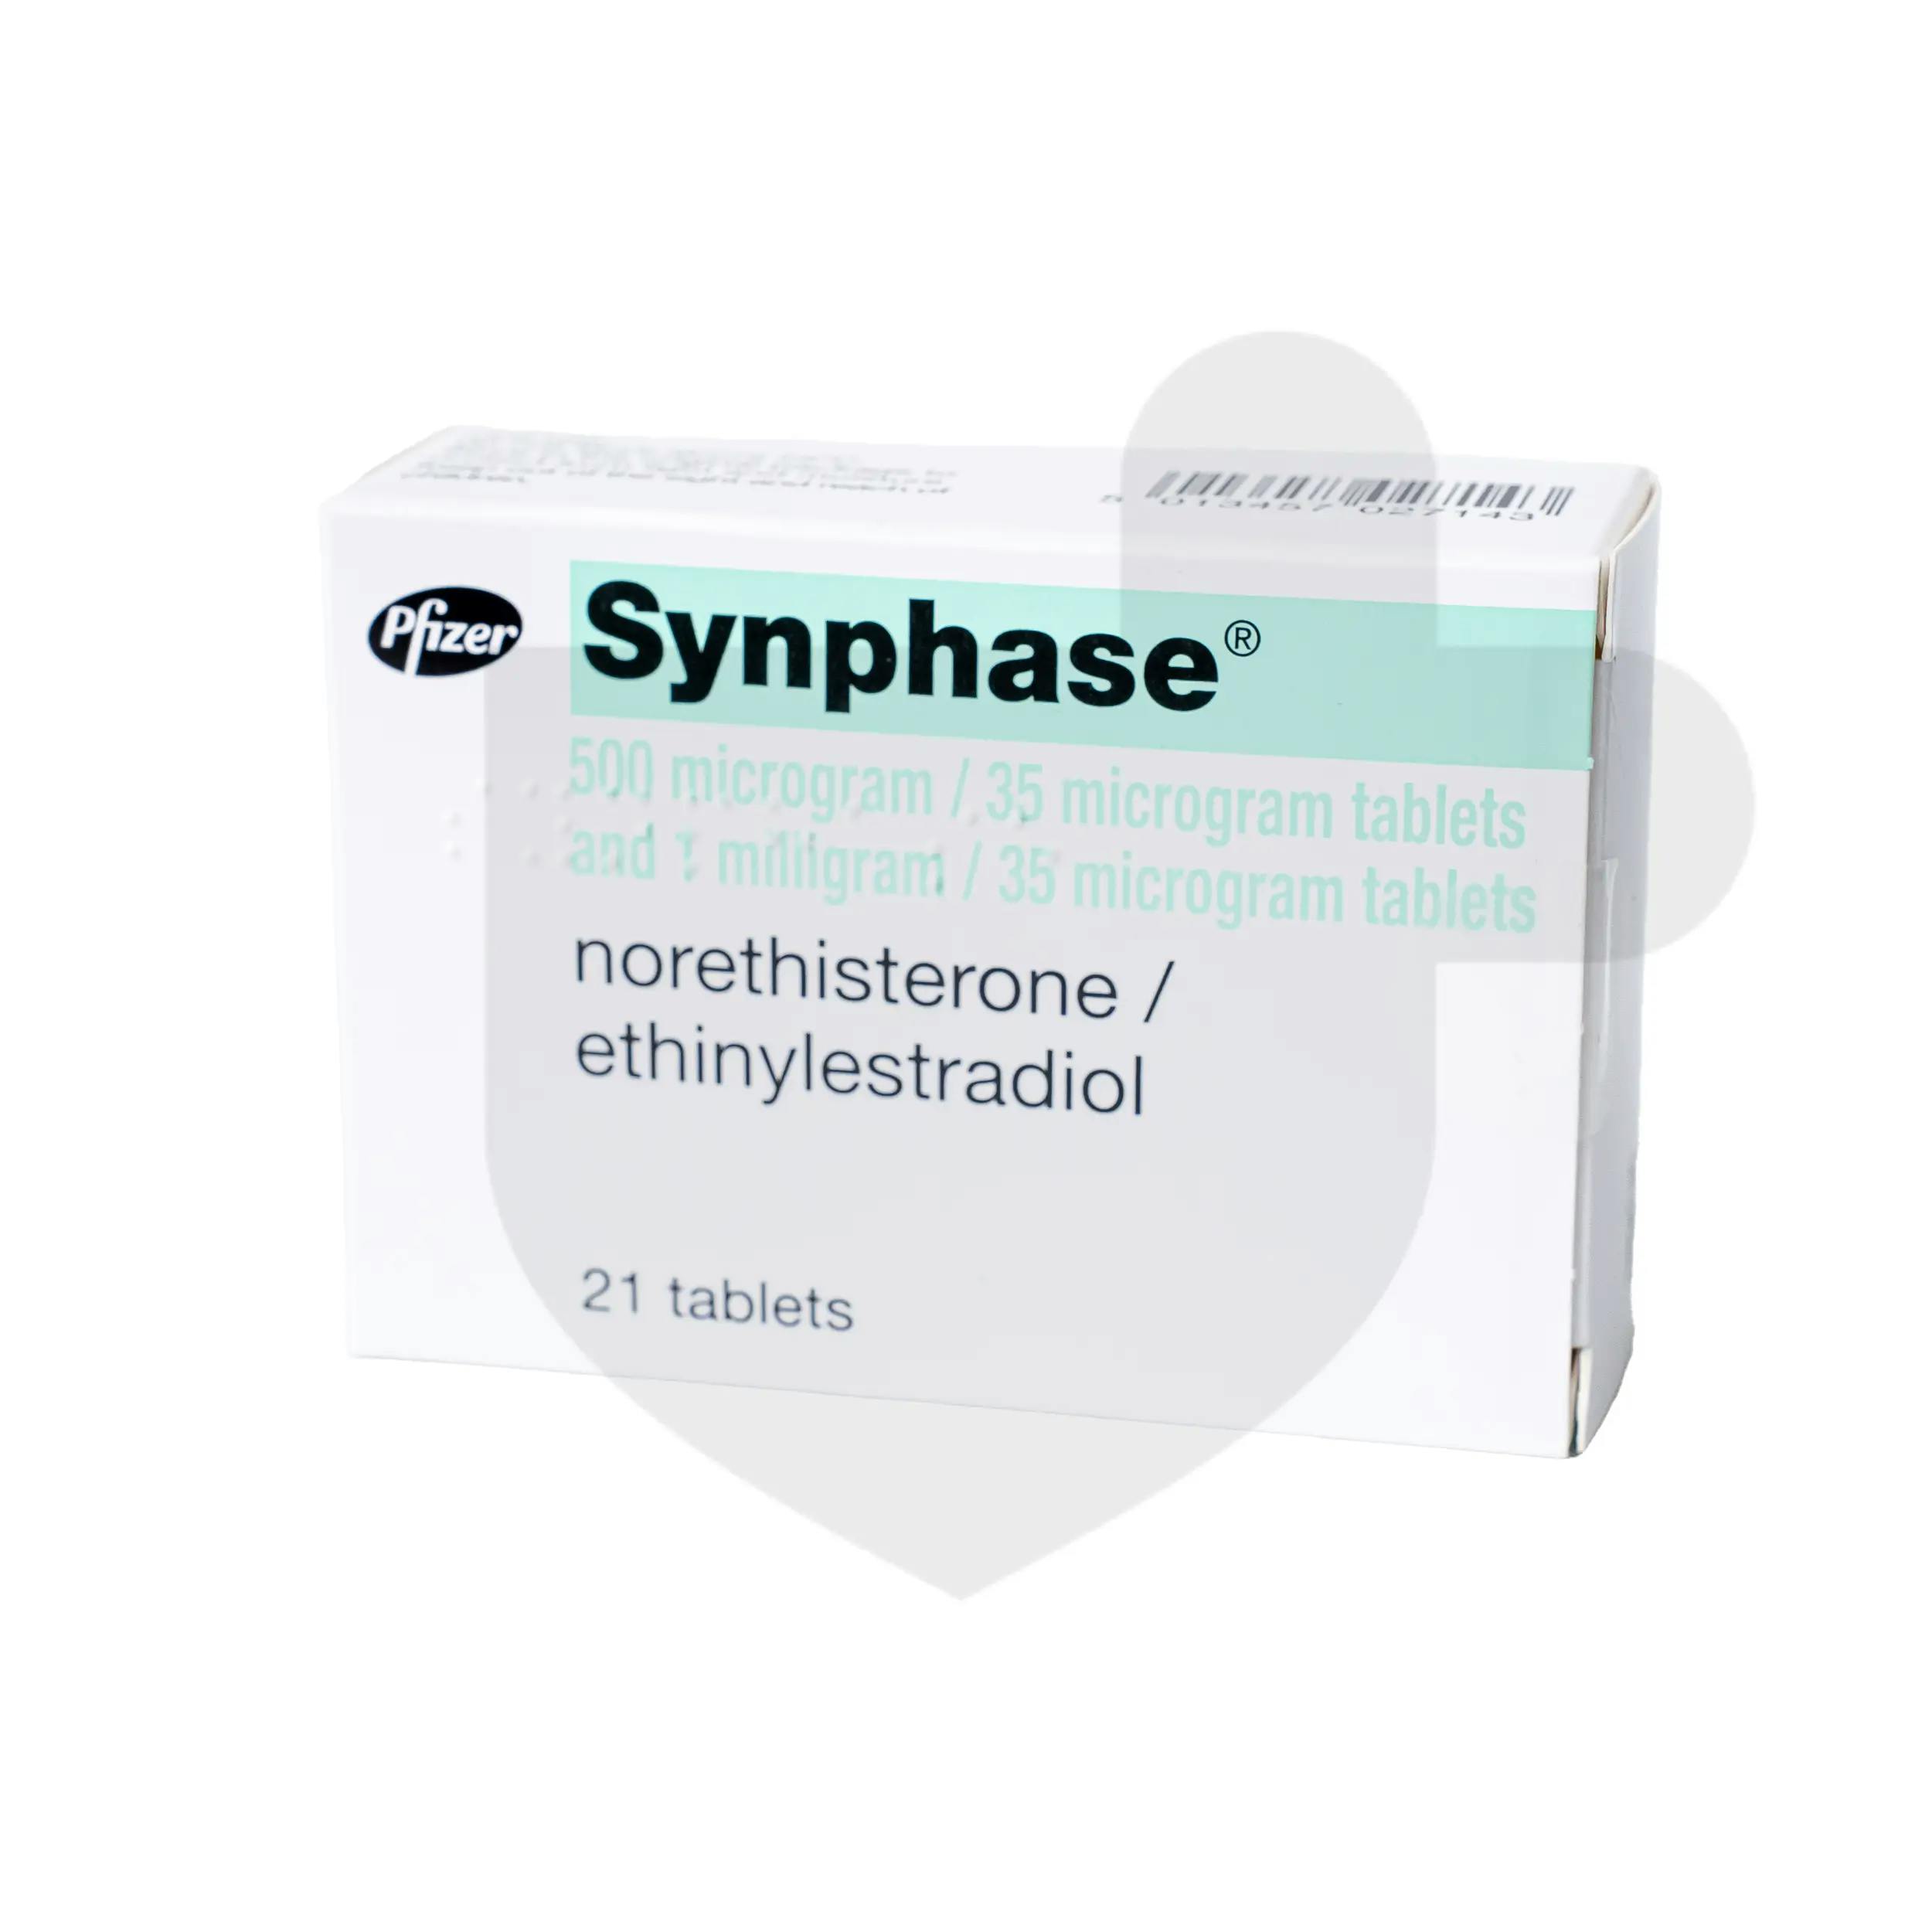 SYNPHASE <sup class="brand-mark">®</sup>